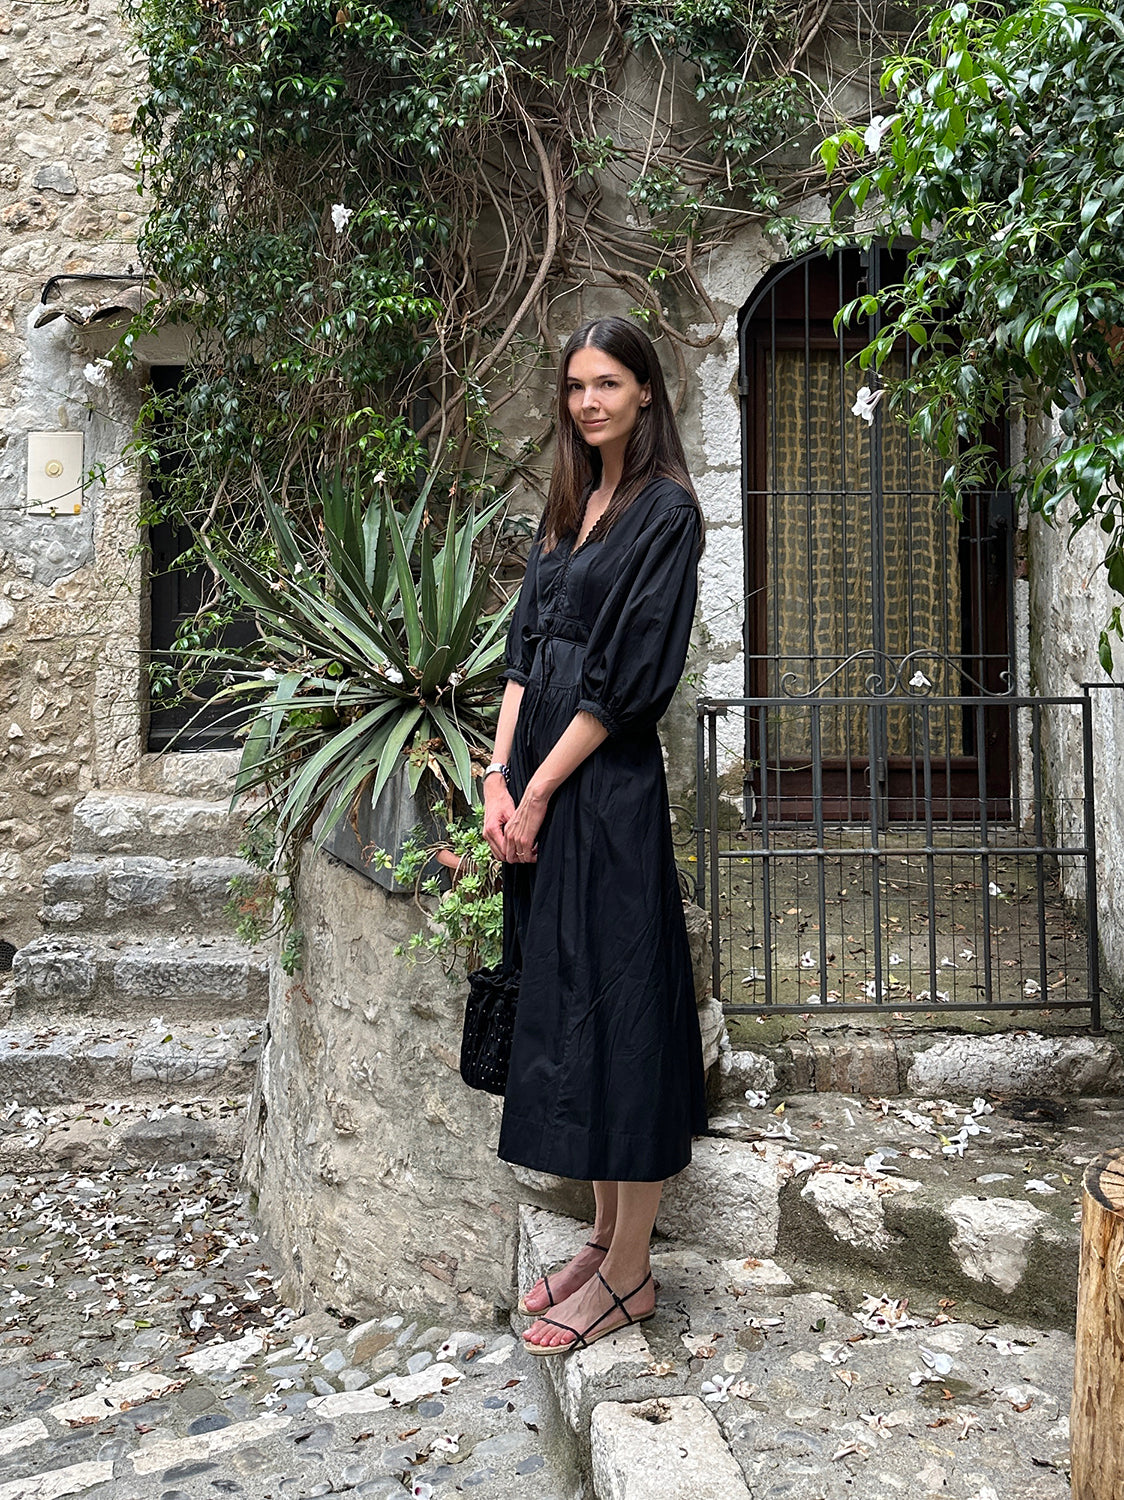 A brunette woman stands on cobbled stairs wearing a black cotton maxidress and strappy black sandals.